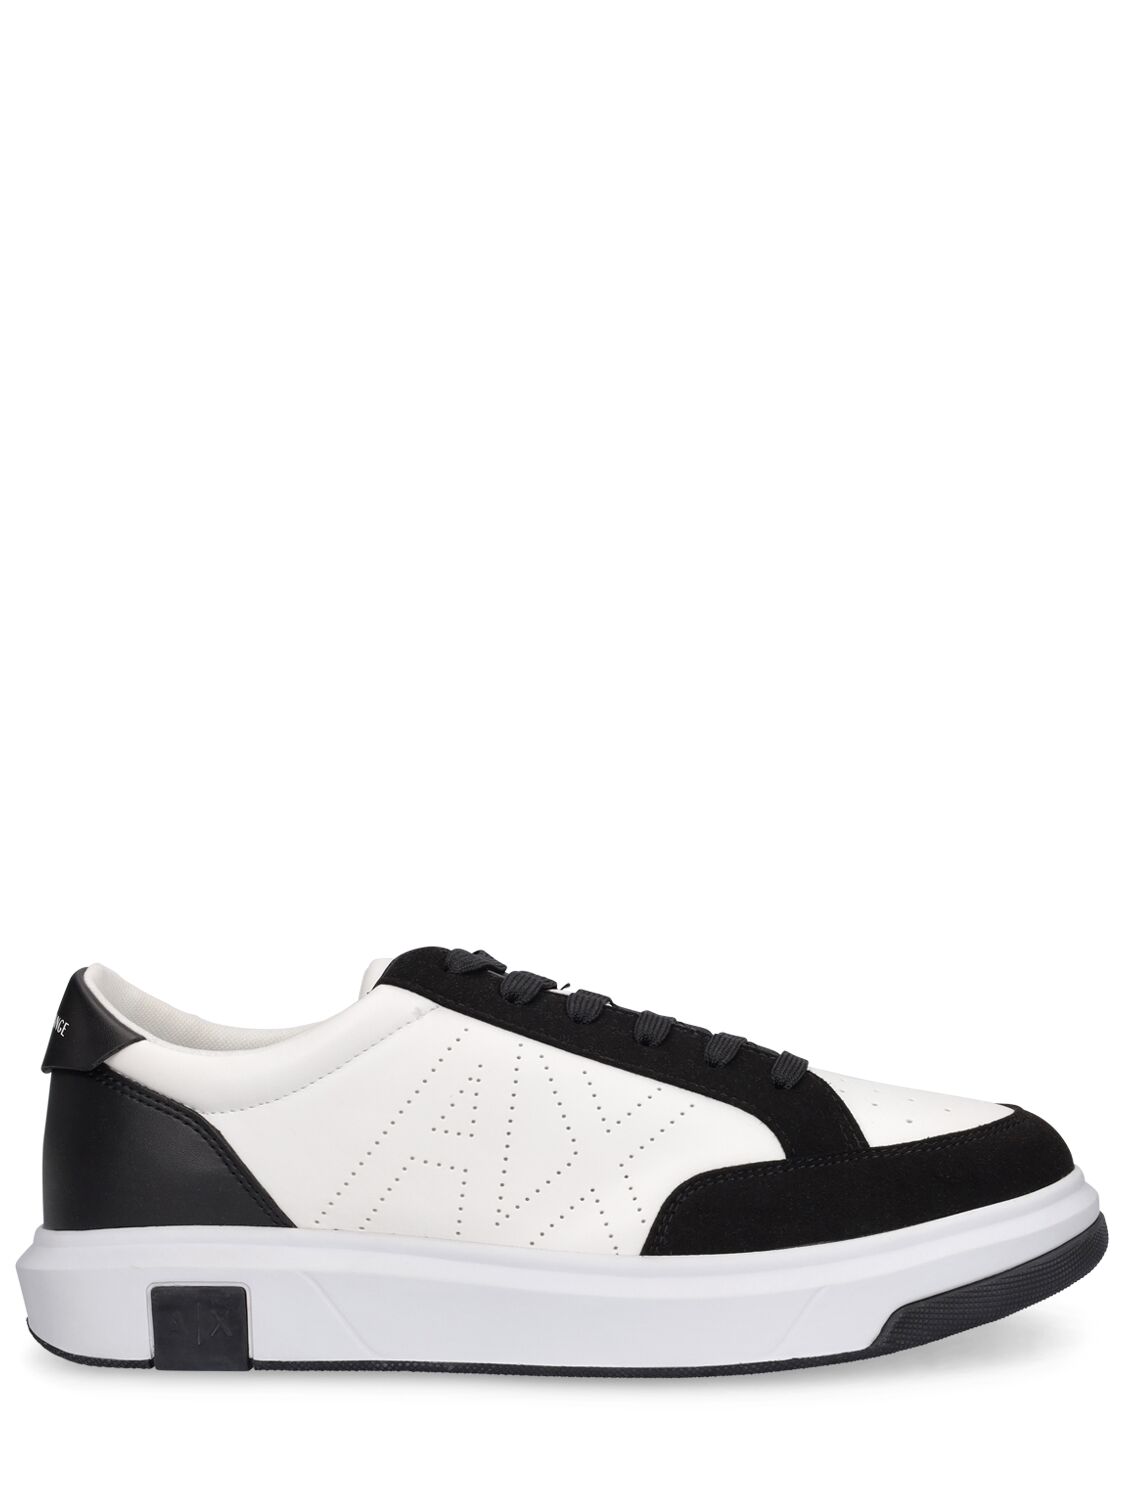 Armani Exchange Official Store Sneakers In White,black